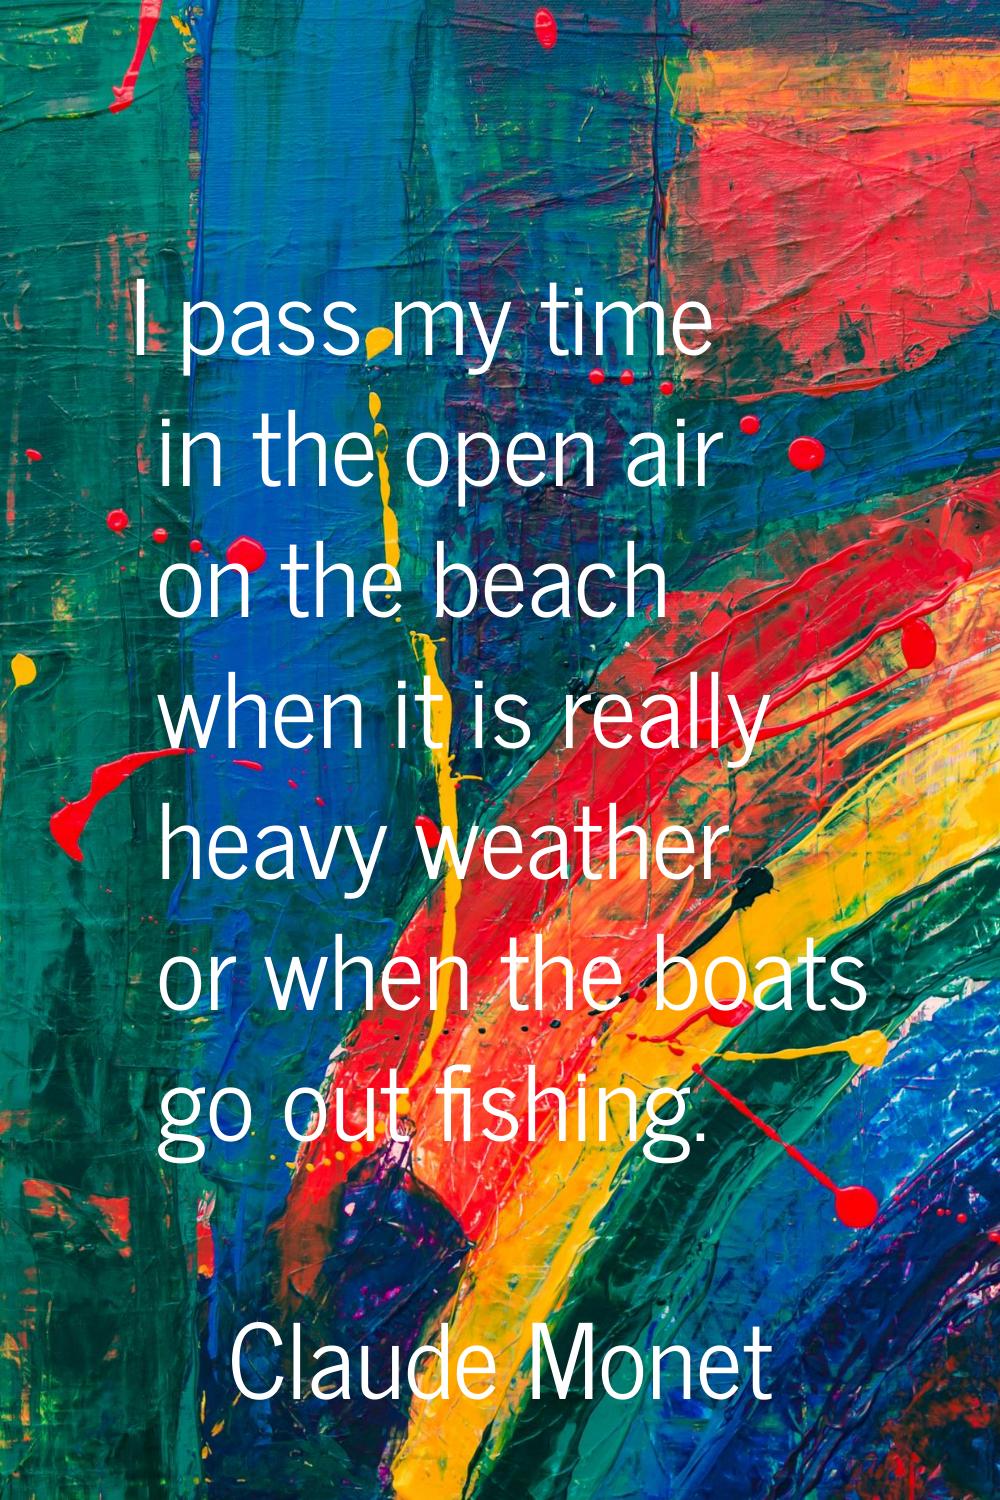 I pass my time in the open air on the beach when it is really heavy weather or when the boats go ou